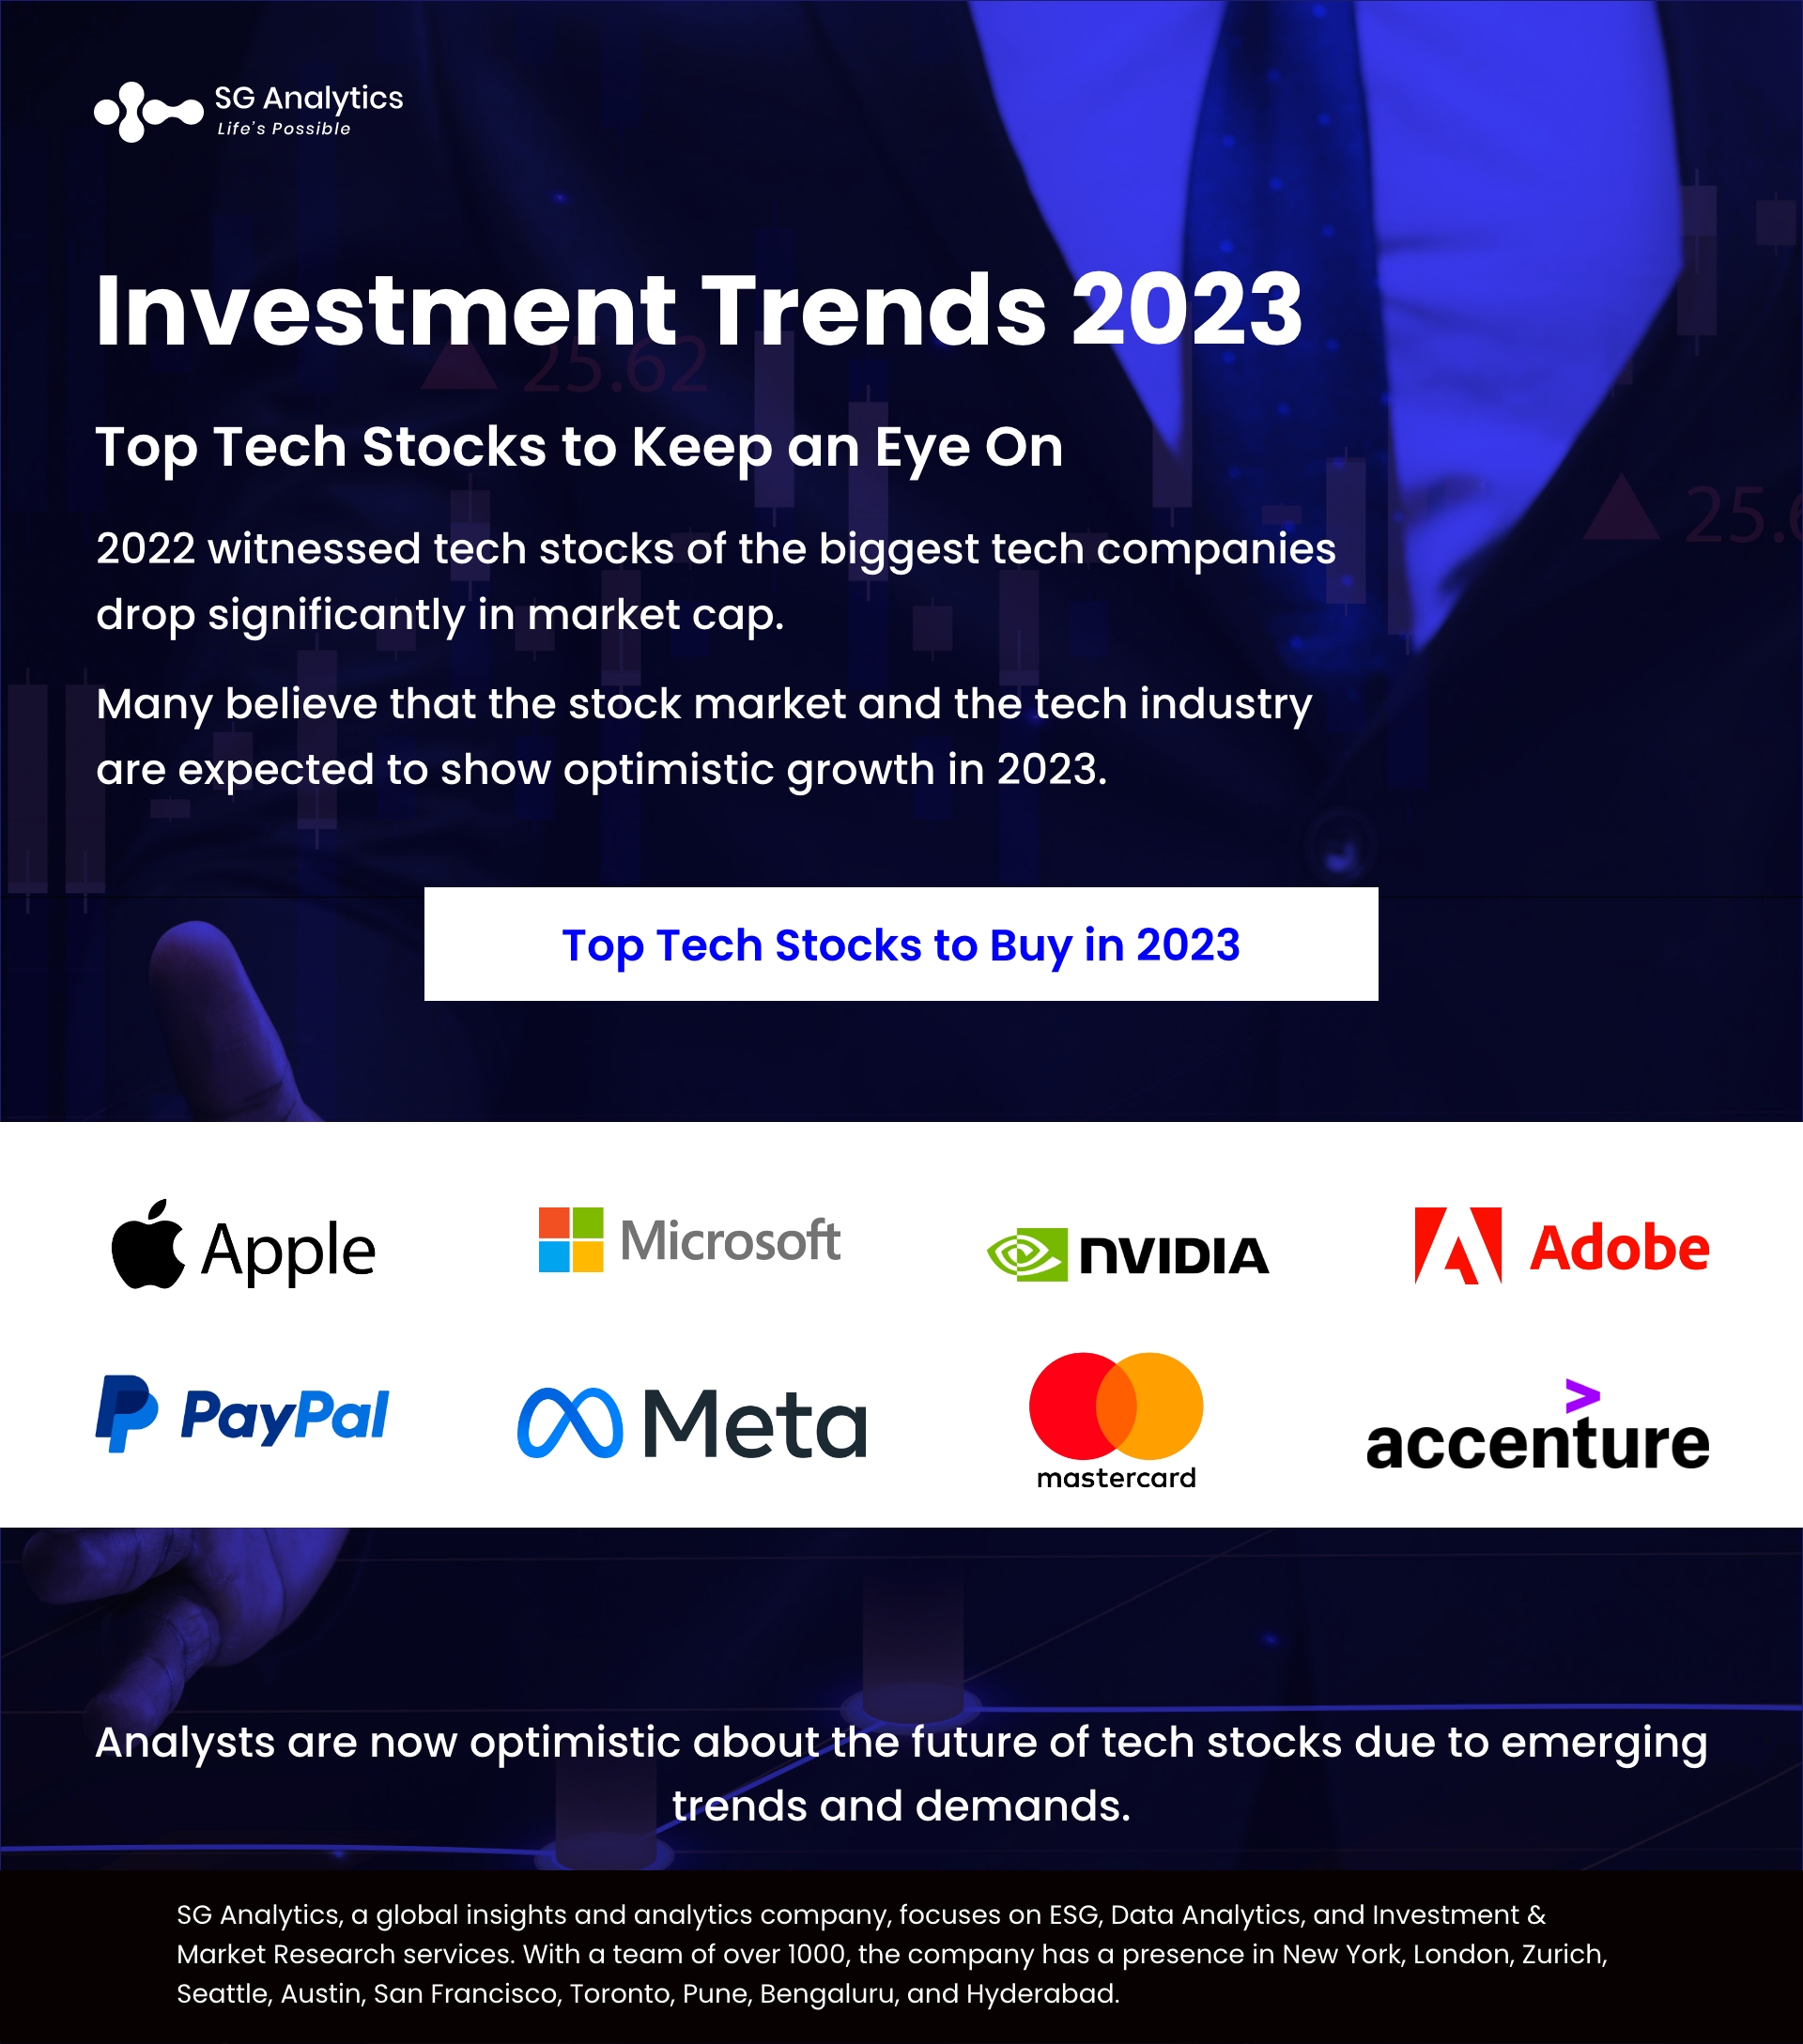 Investment Trends 2023 - Top Tech Stocks to Keep an Eye On